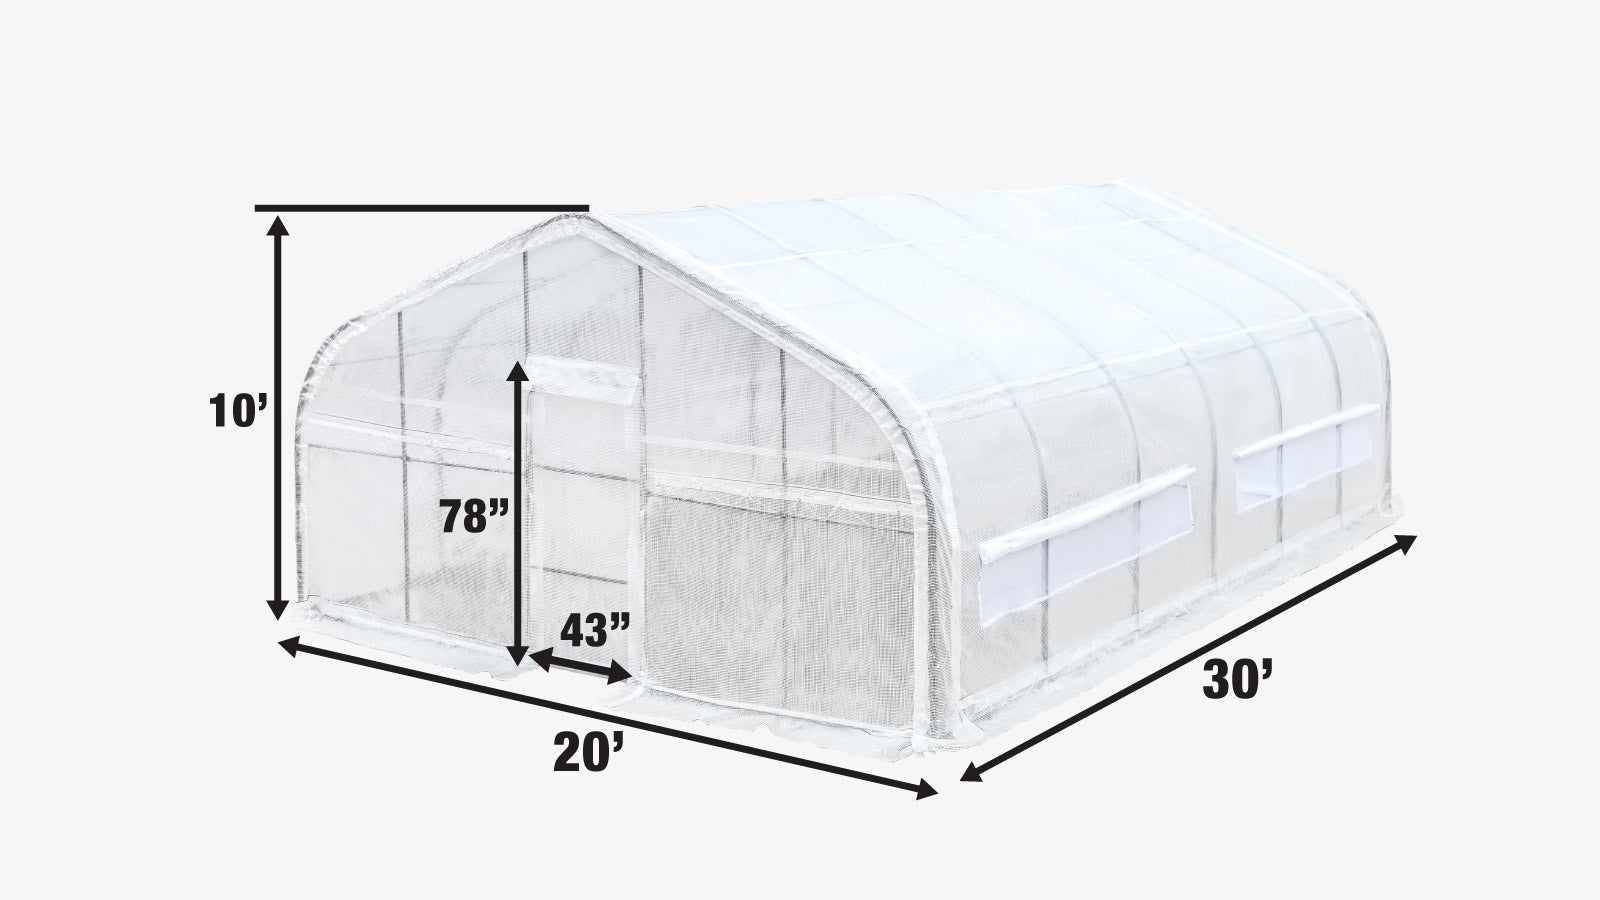 TMG Industrial 20’ x 30’ Tunnel Greenhouse Grow Tent w/12 Mil Ripstop Leno Mesh Cover, Cold Frame, Roll-up Windows, Peak Ceiling Roof, TMG-GH2030-specifications-image